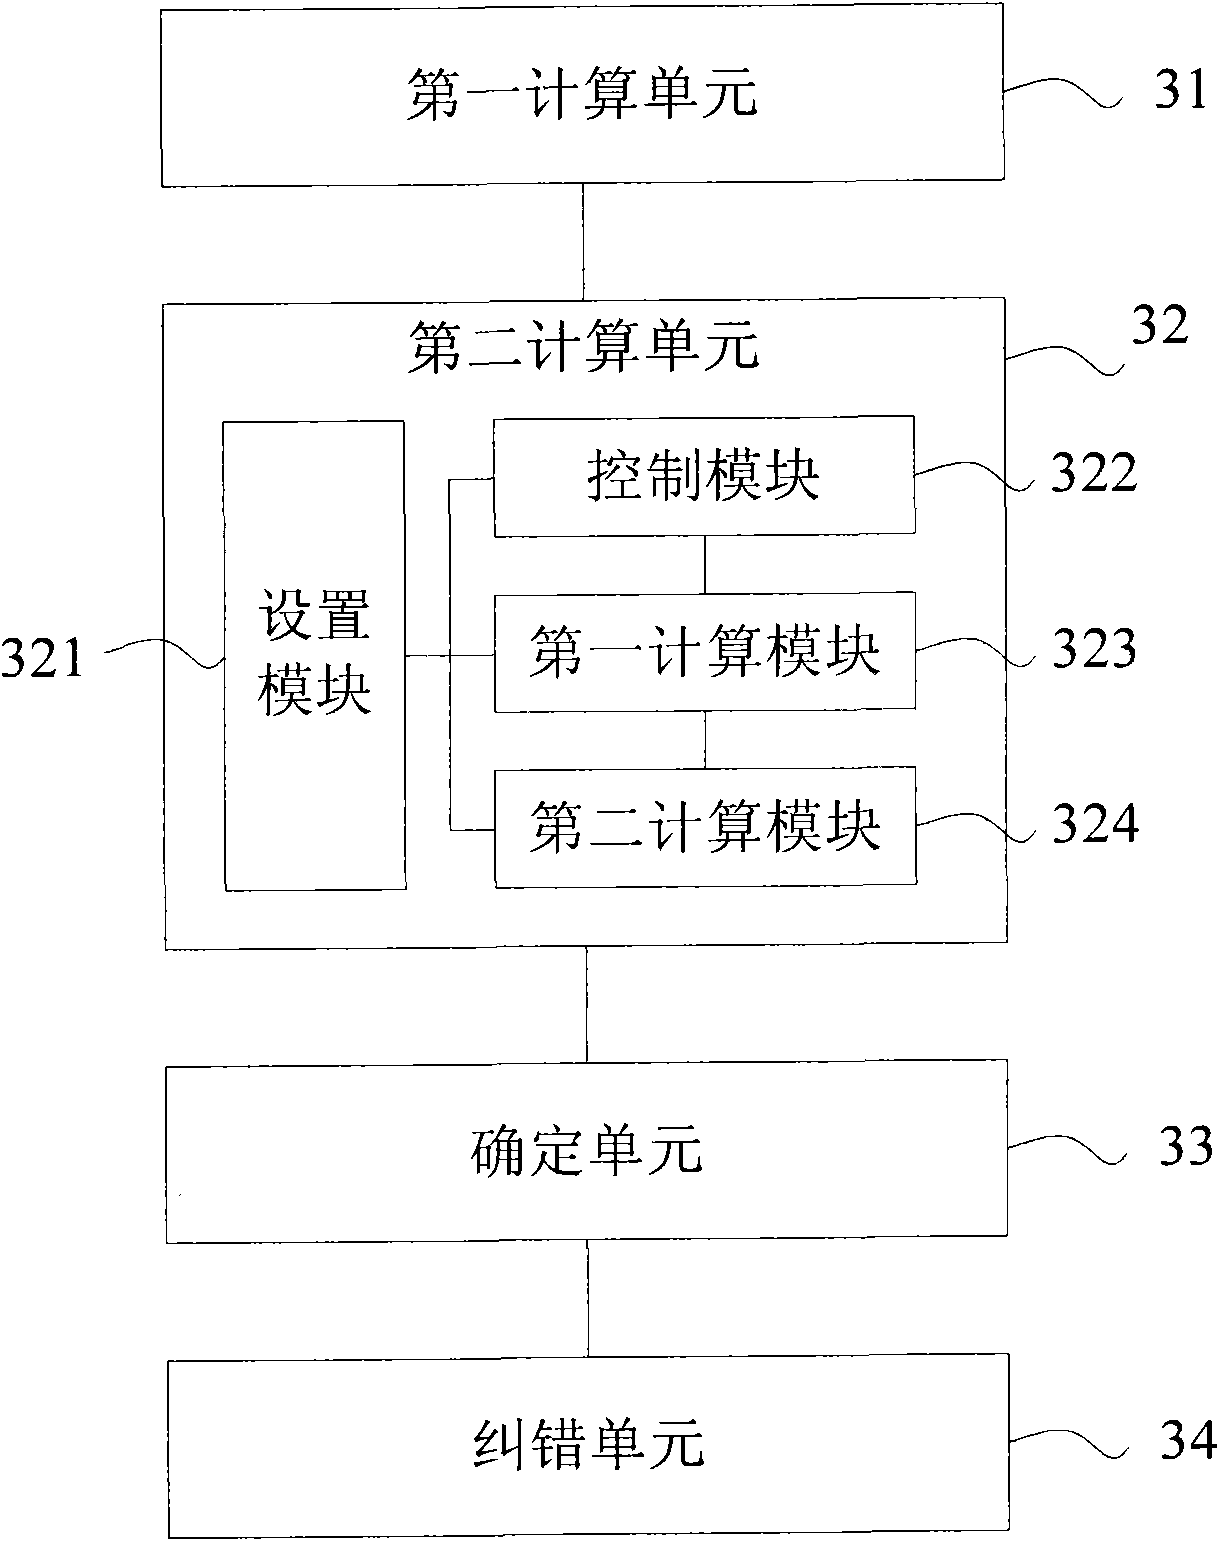 Method and device for decoding broadcast channel (BCH) code